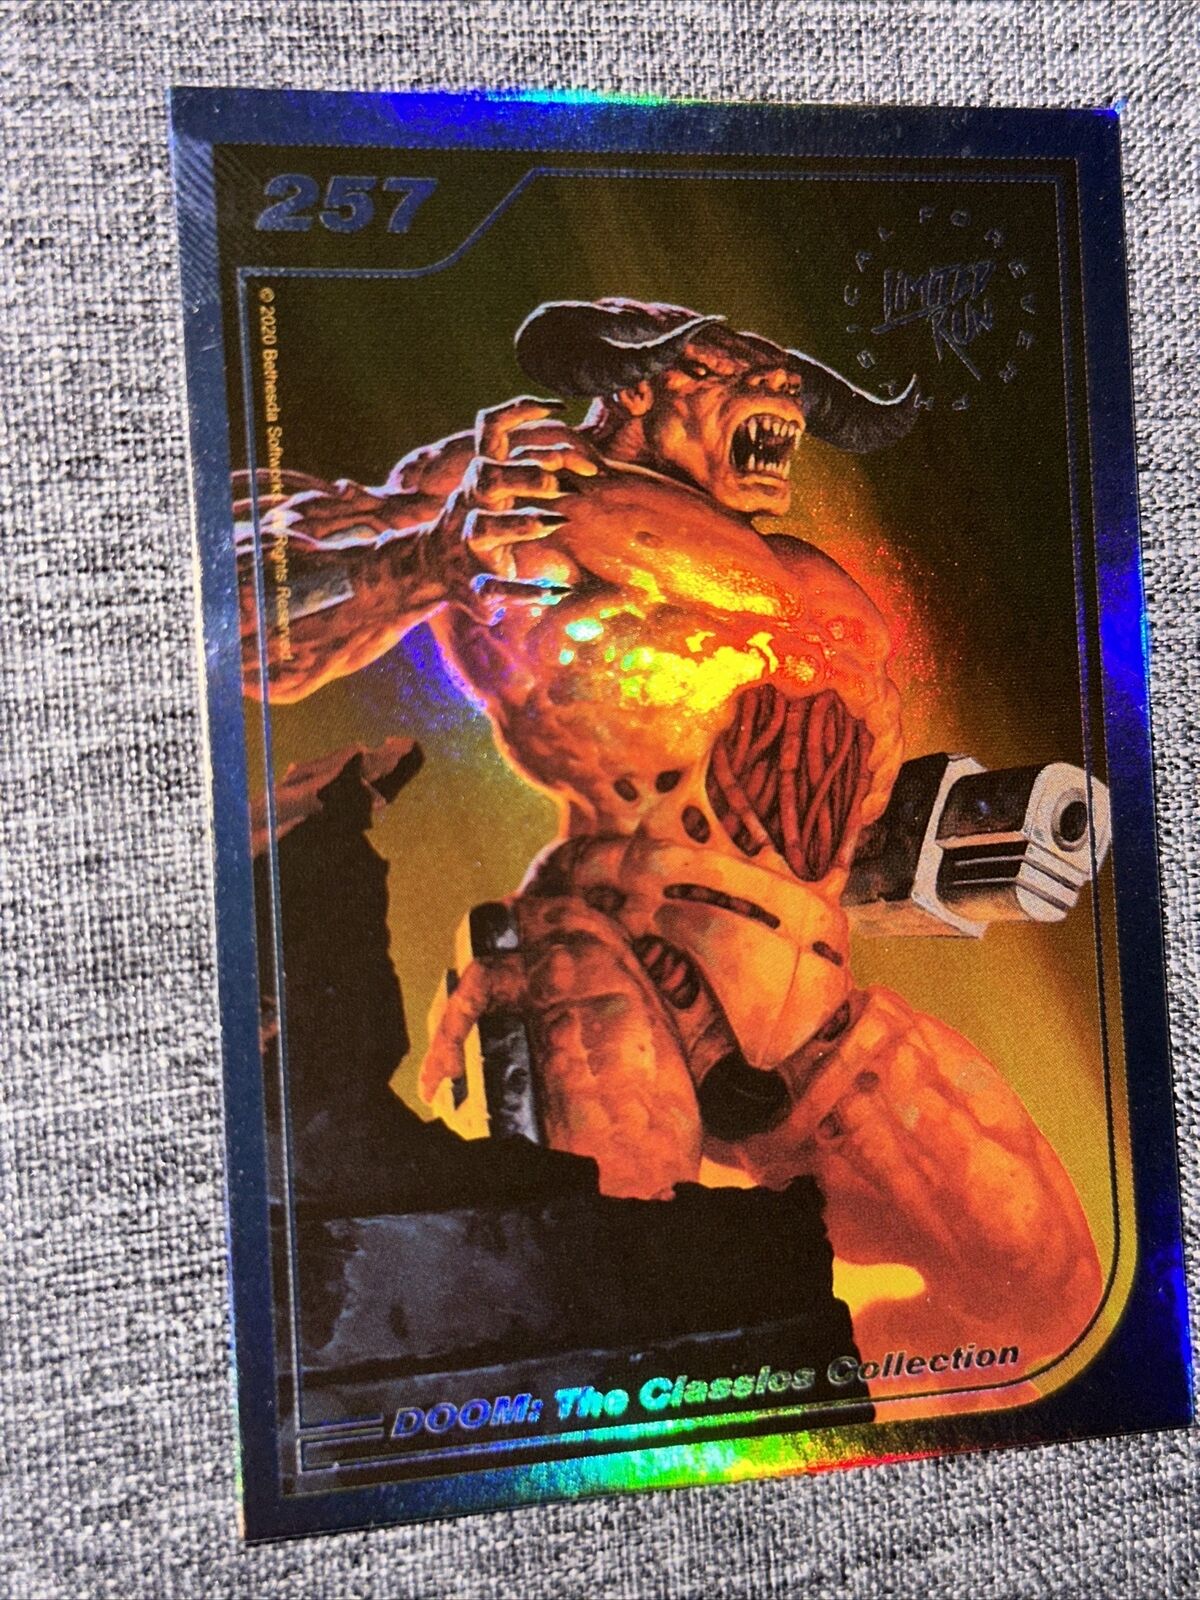 Doom The Classics Collection #257 Limited Run Games Silver Trading Card 257